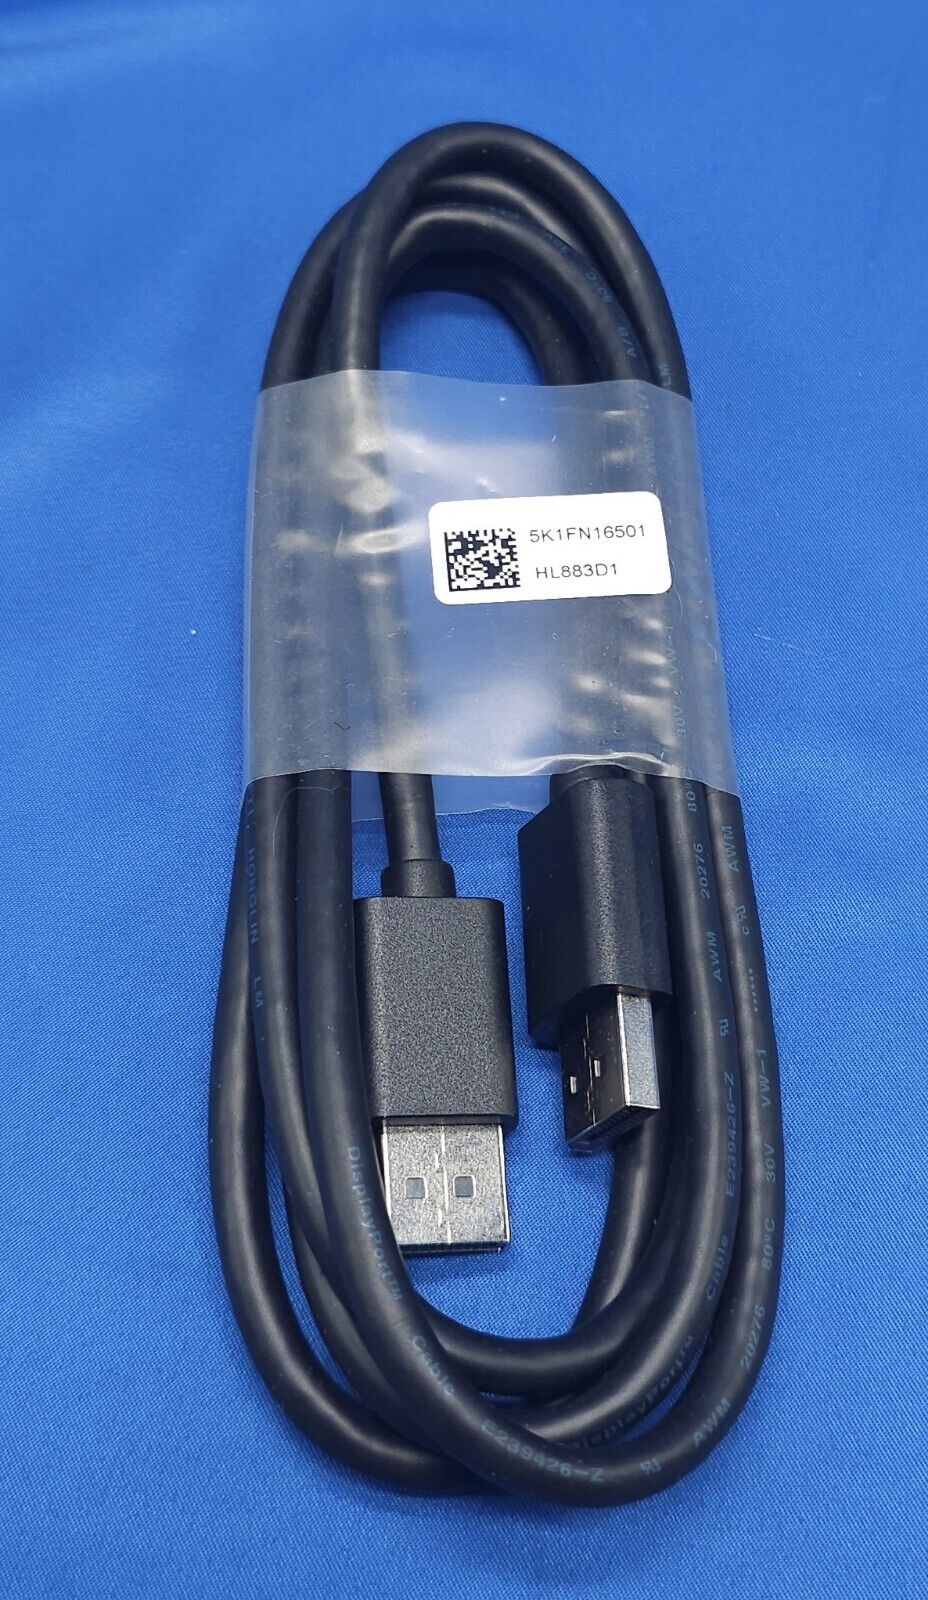 DELL DISPLAY PORT CABLE 6FT  5K1FN13501  *NEW*